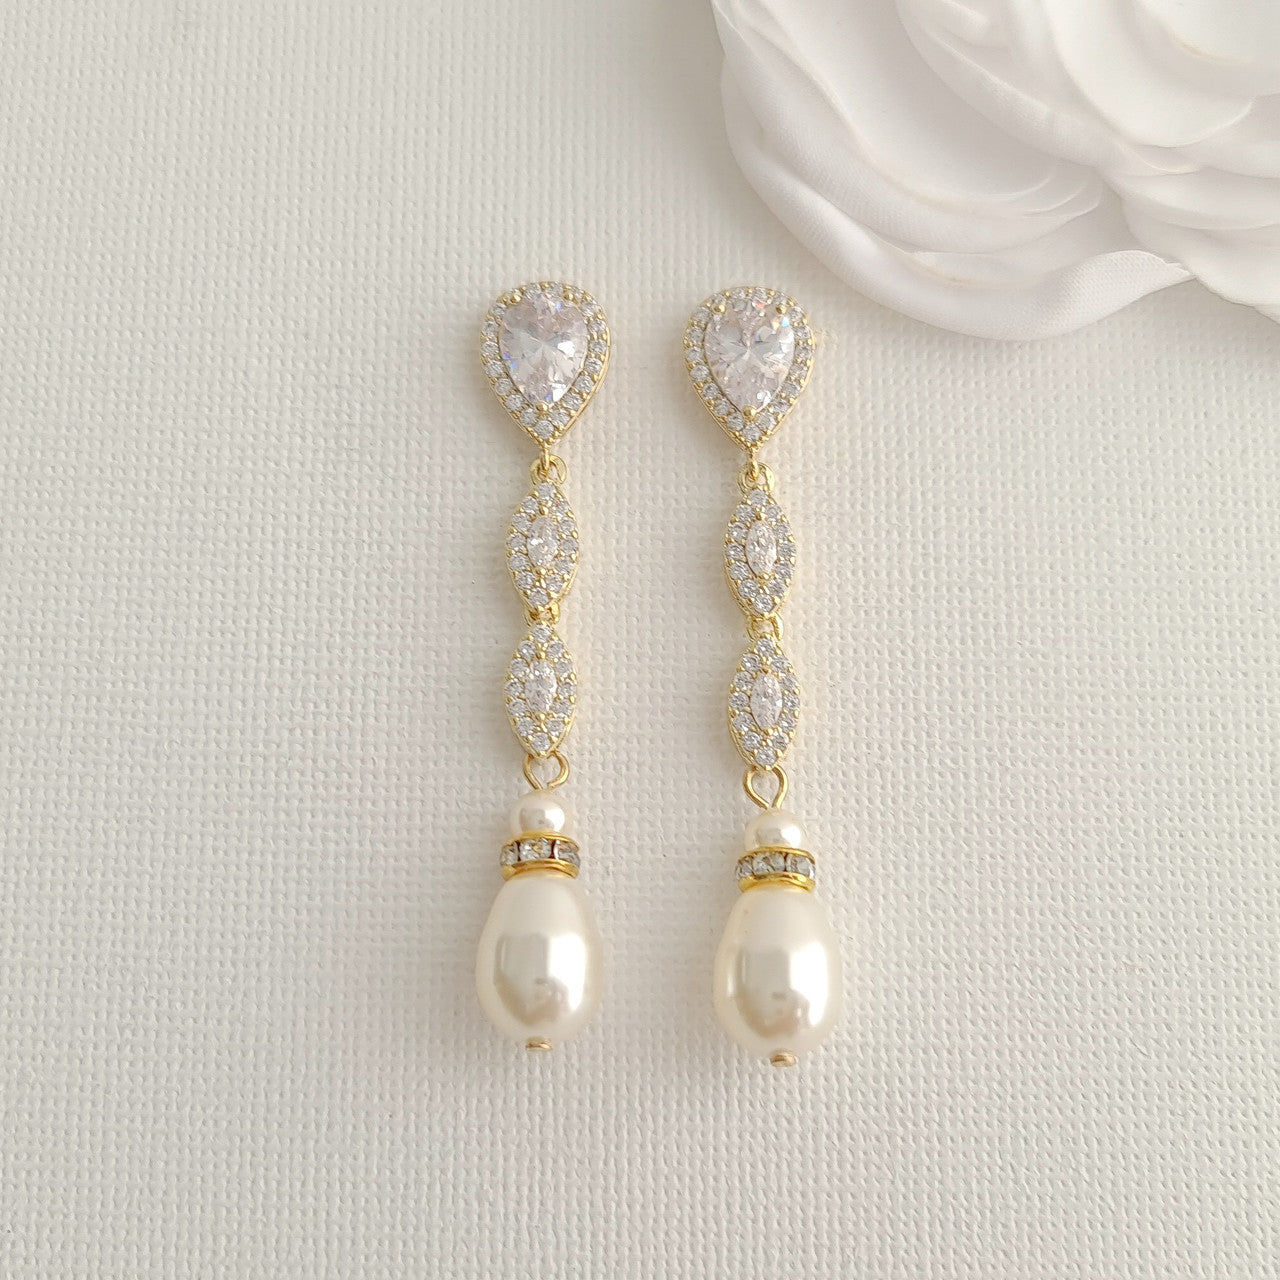 Pearl Wedding Jewellery Set in Rose Gold-Abby